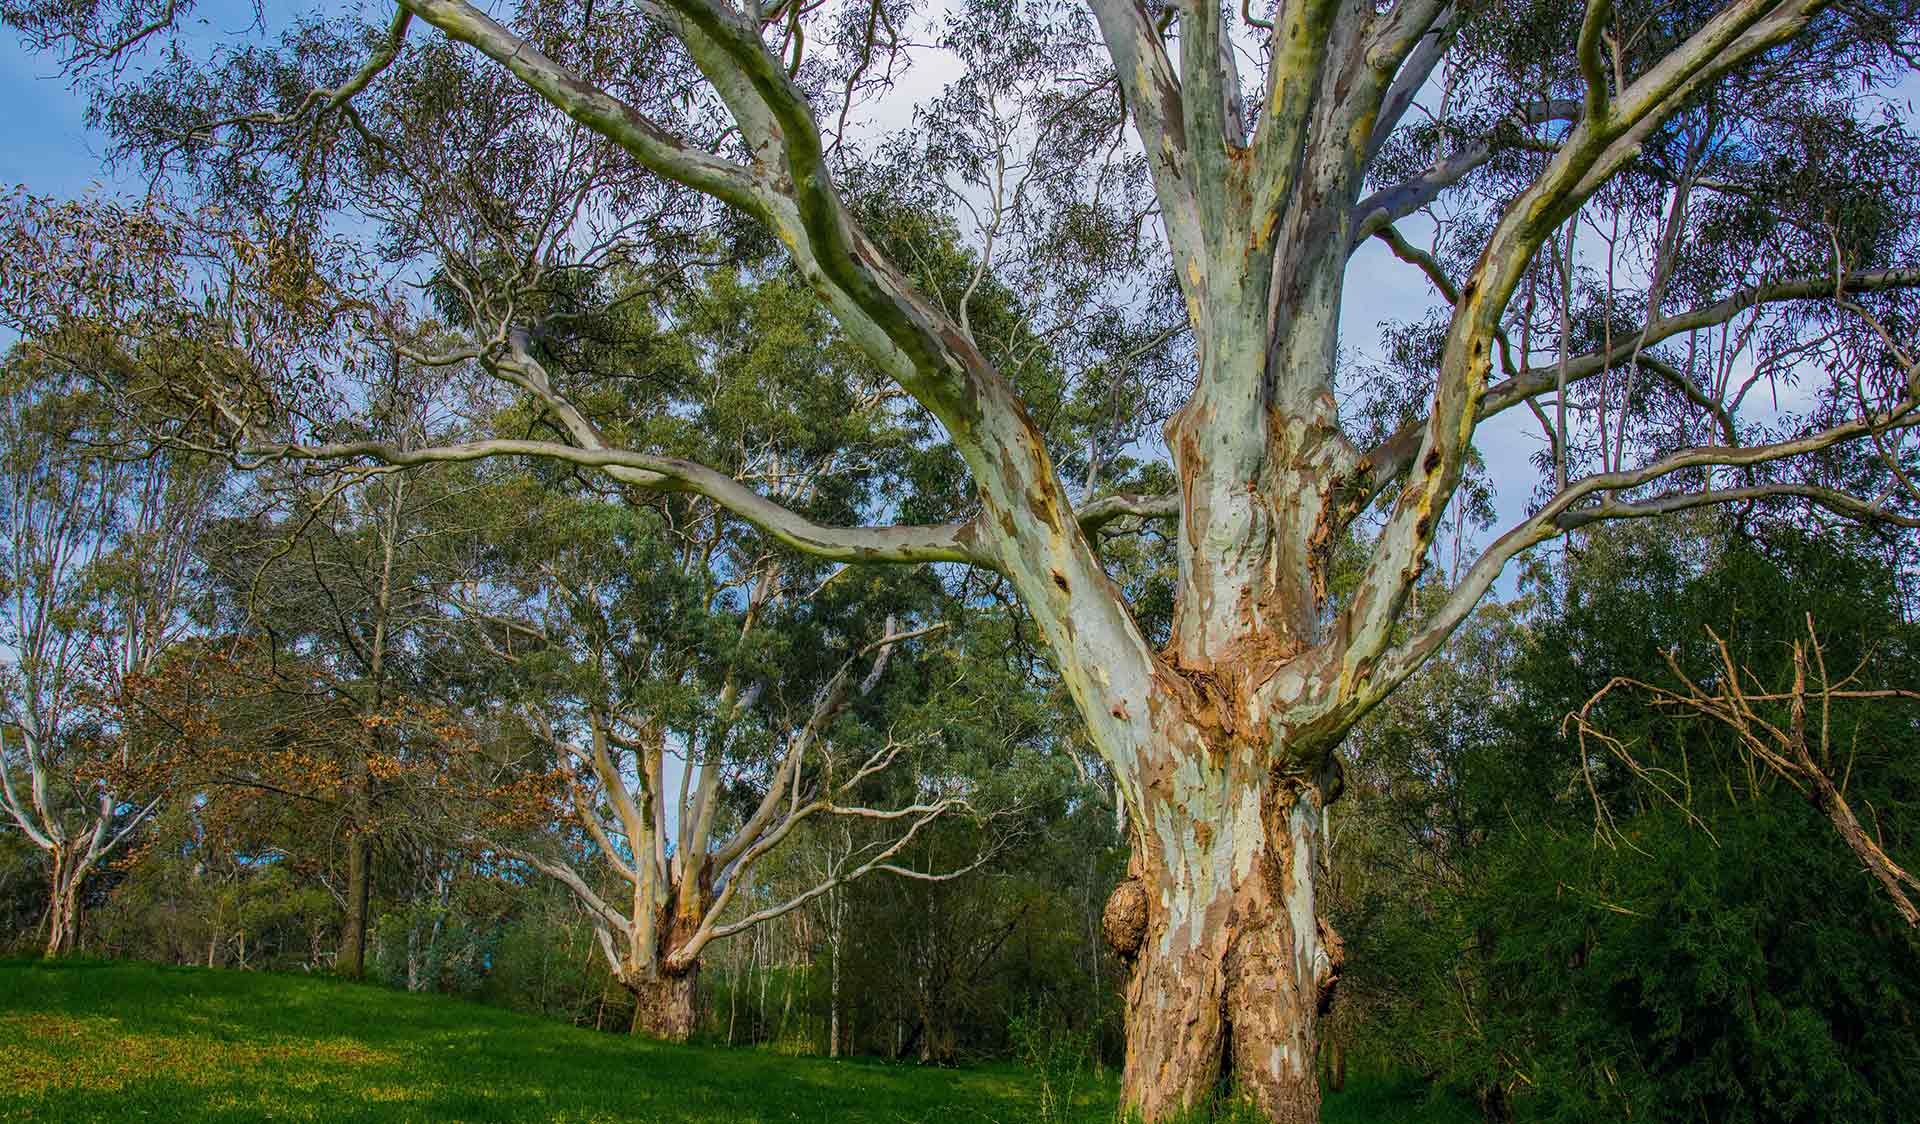 A river red gum in Banksia Park.